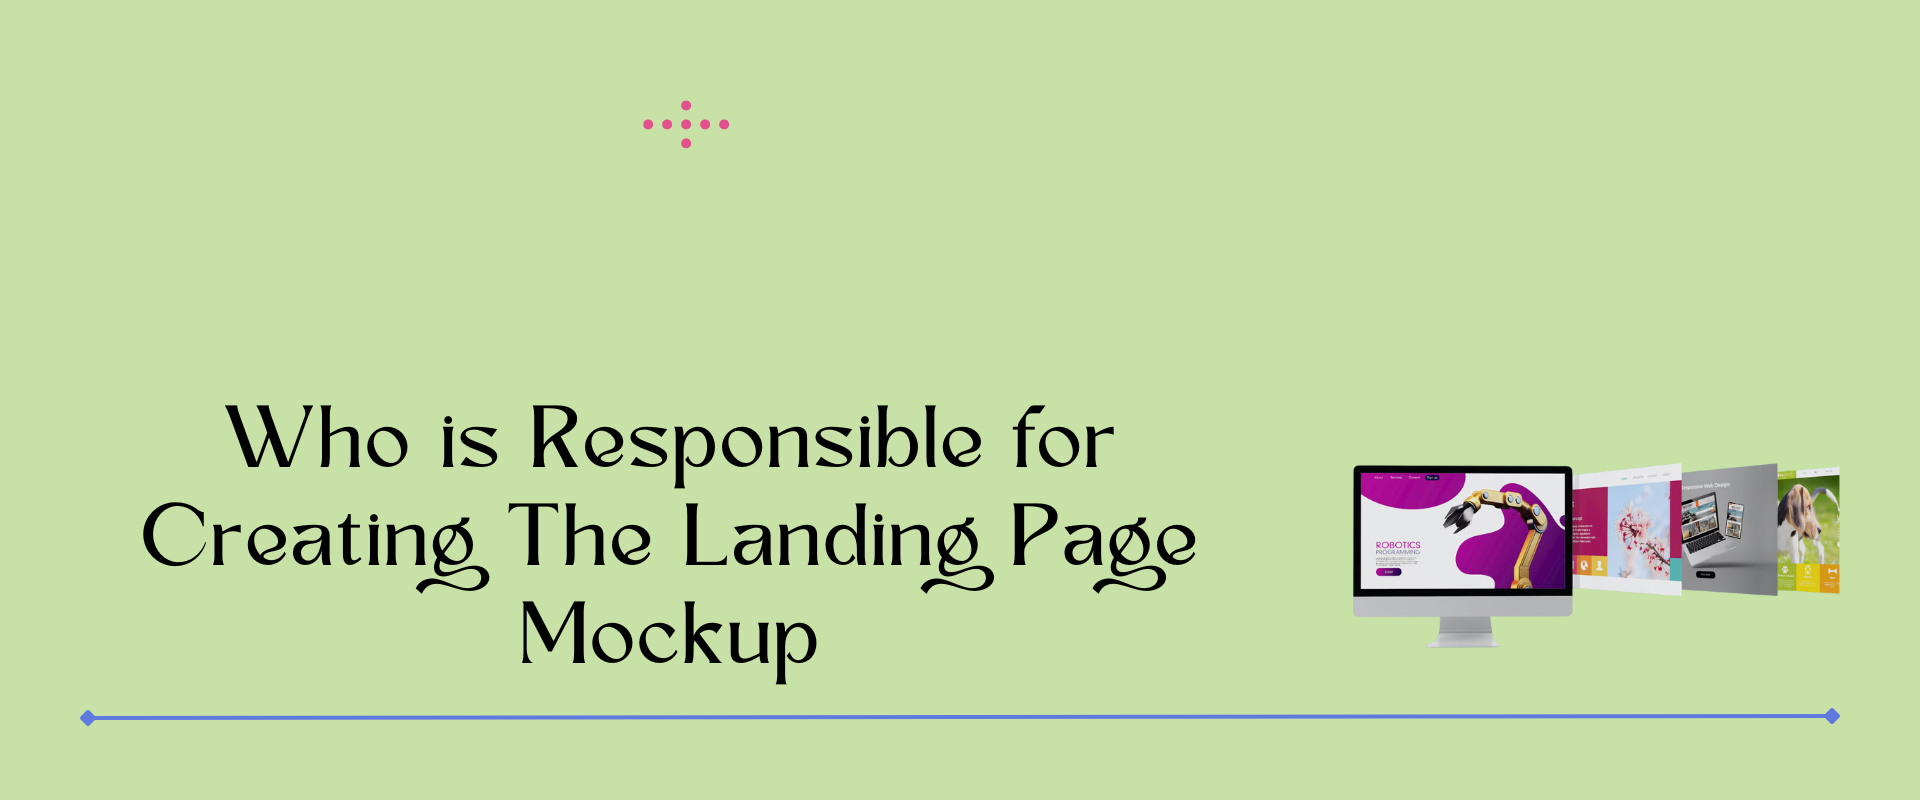 who is responsible for creating the landing page mockup